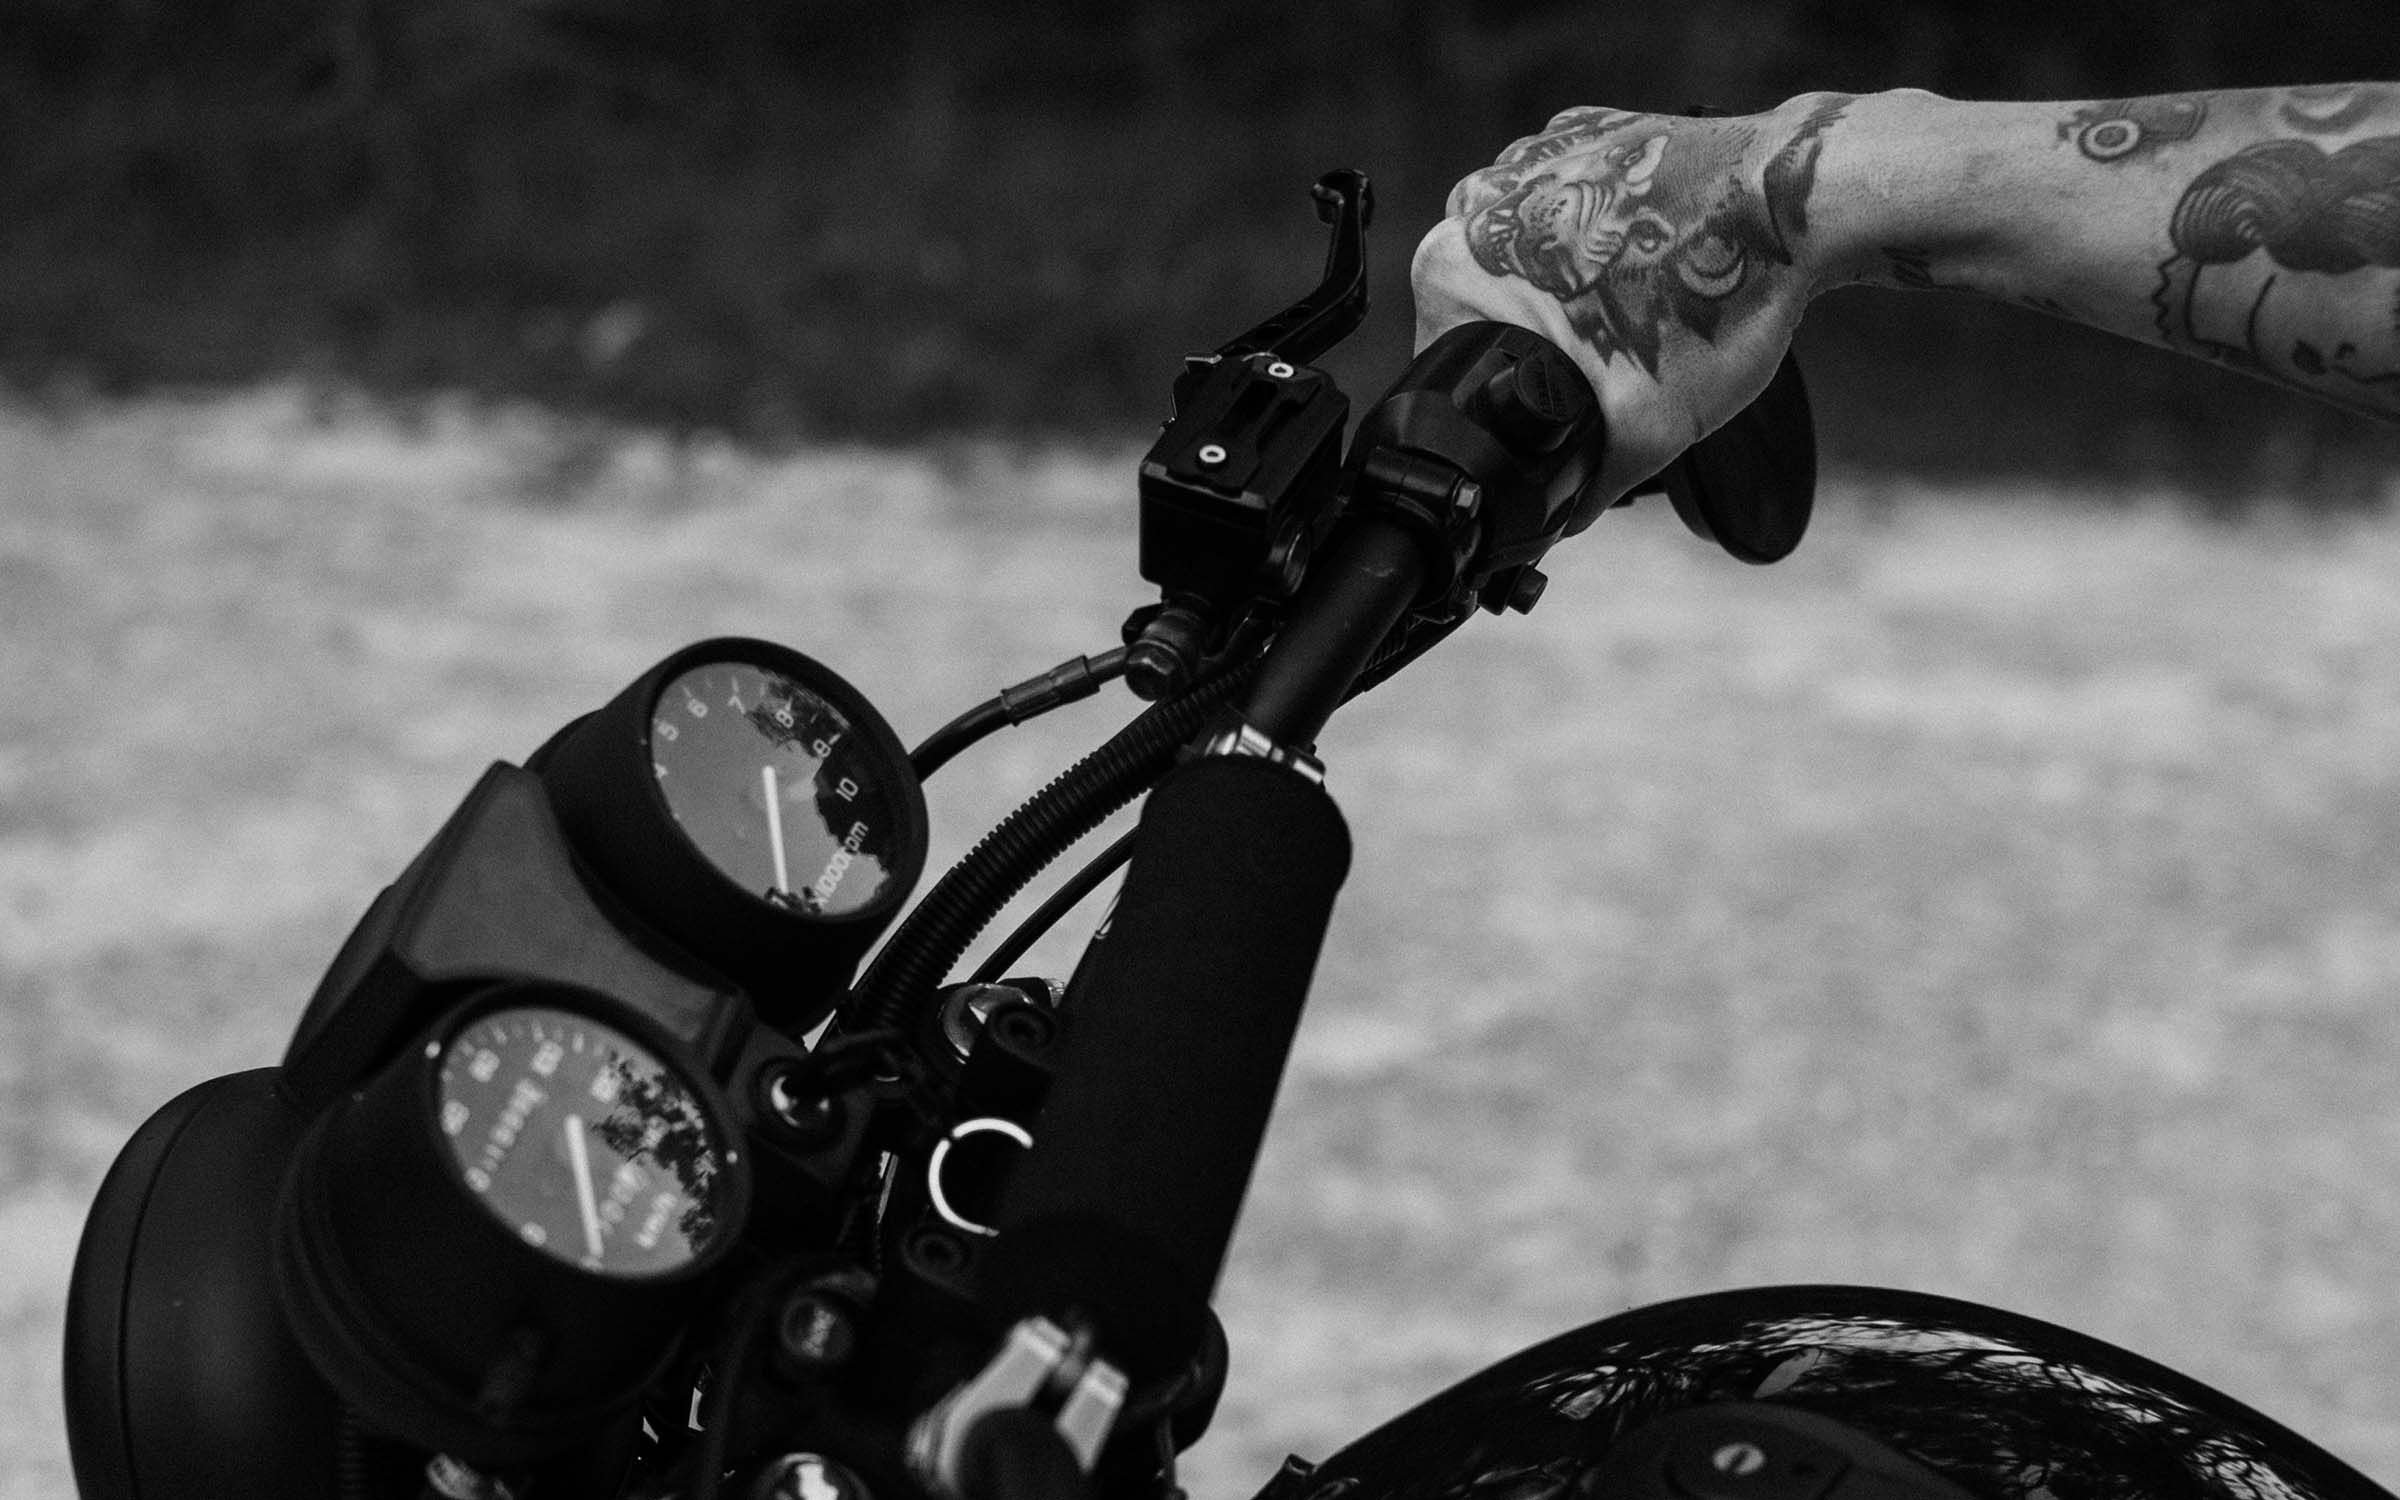 What Women Find Sexy about Men and Motorcycles